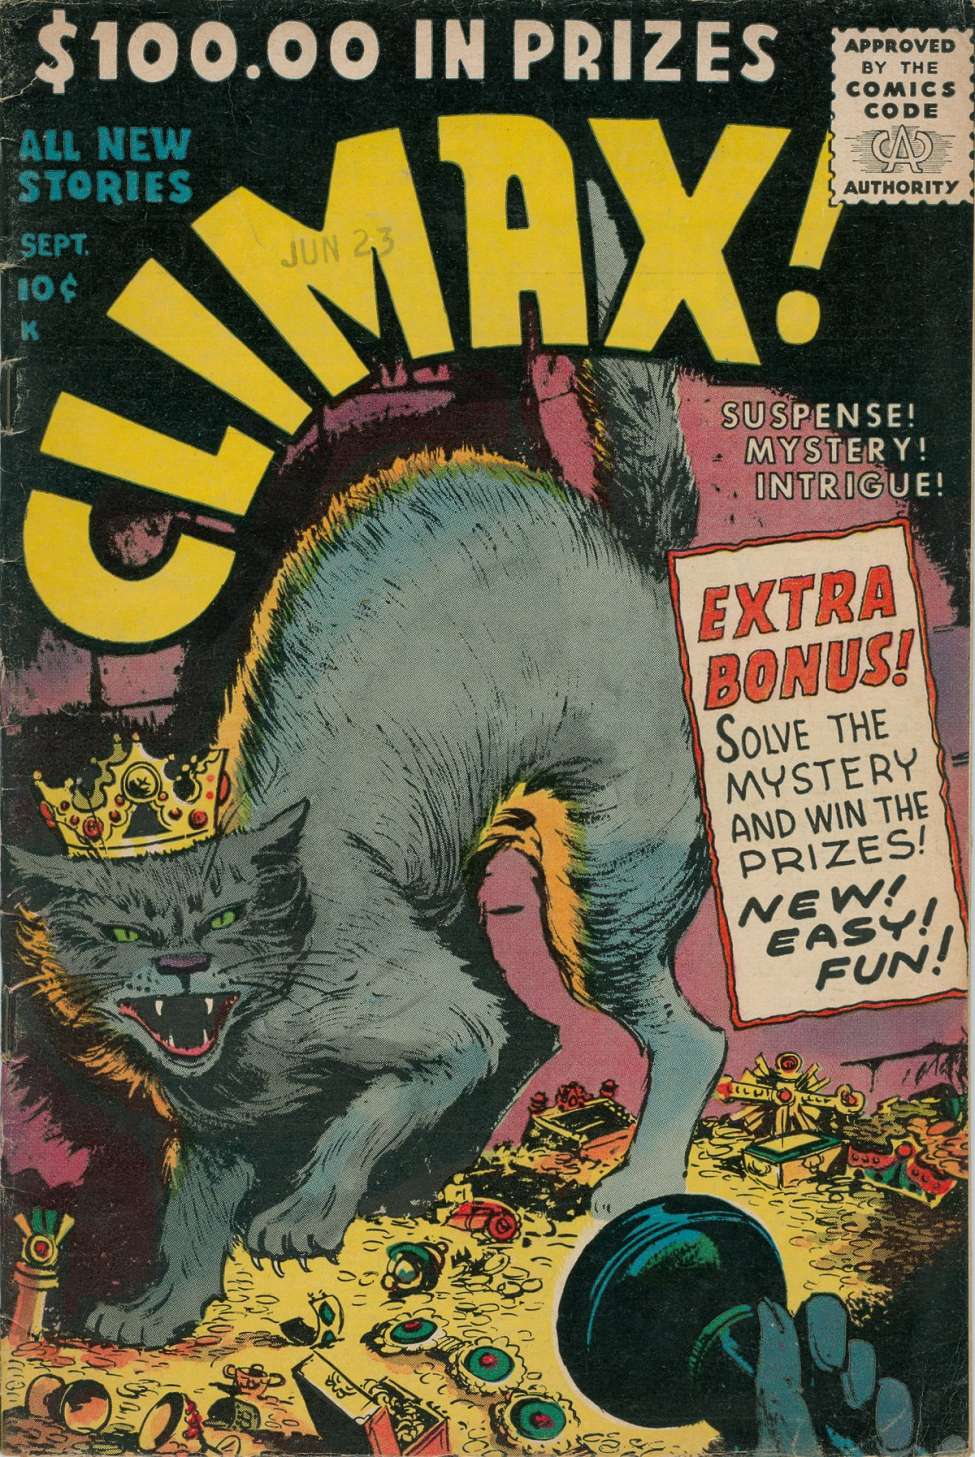 Book Cover For Climax 2